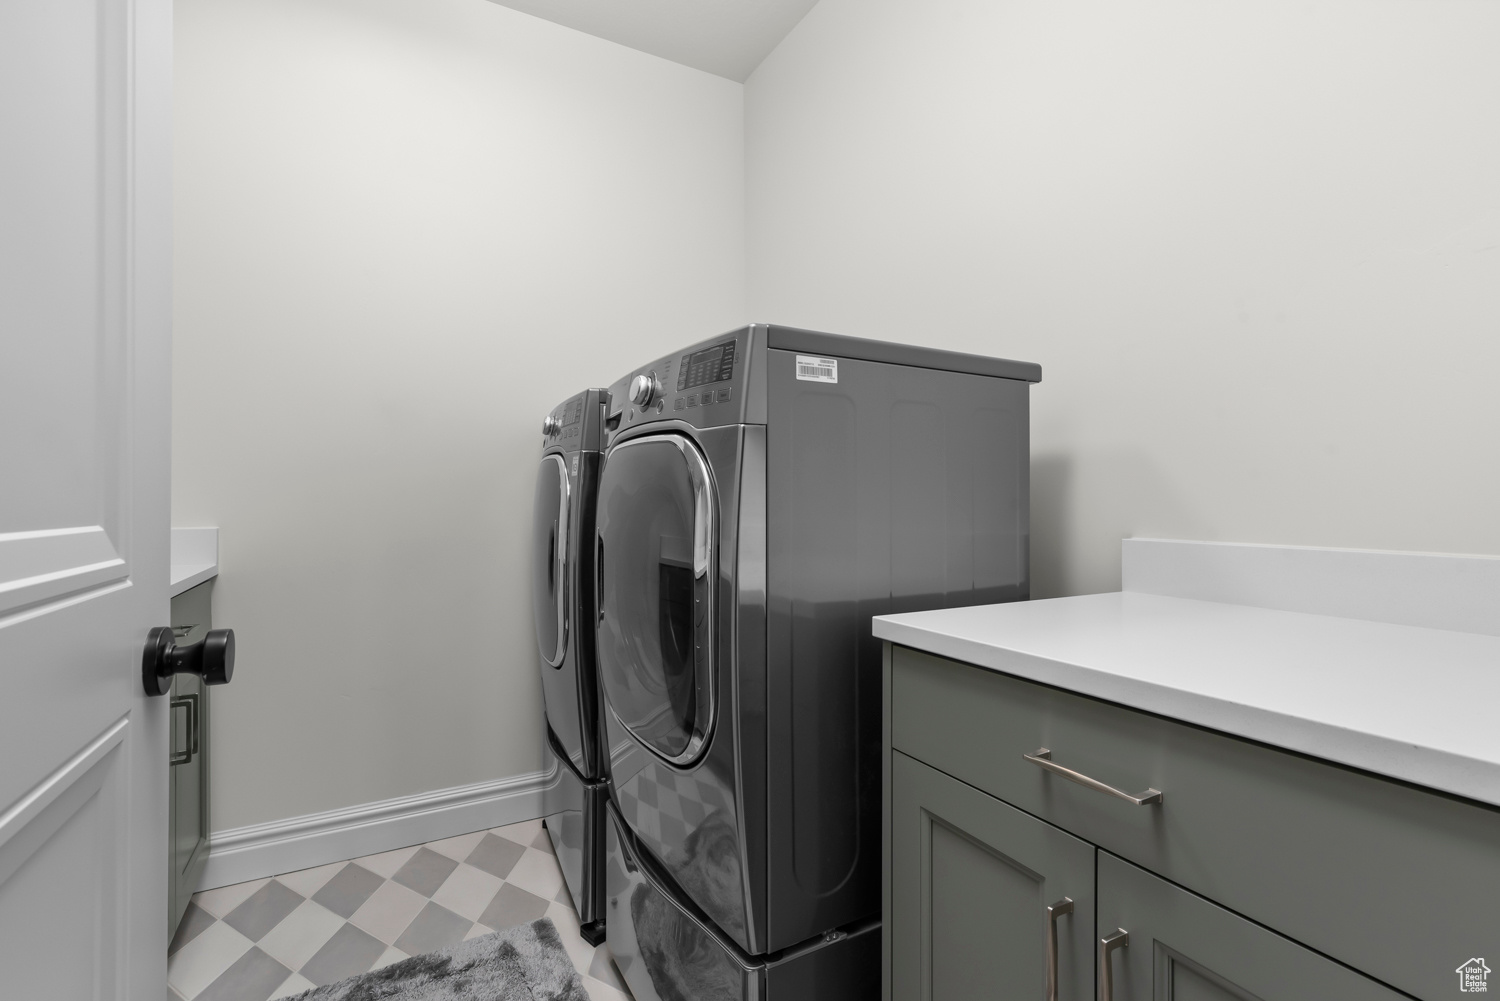 Full laundry with tile flooring